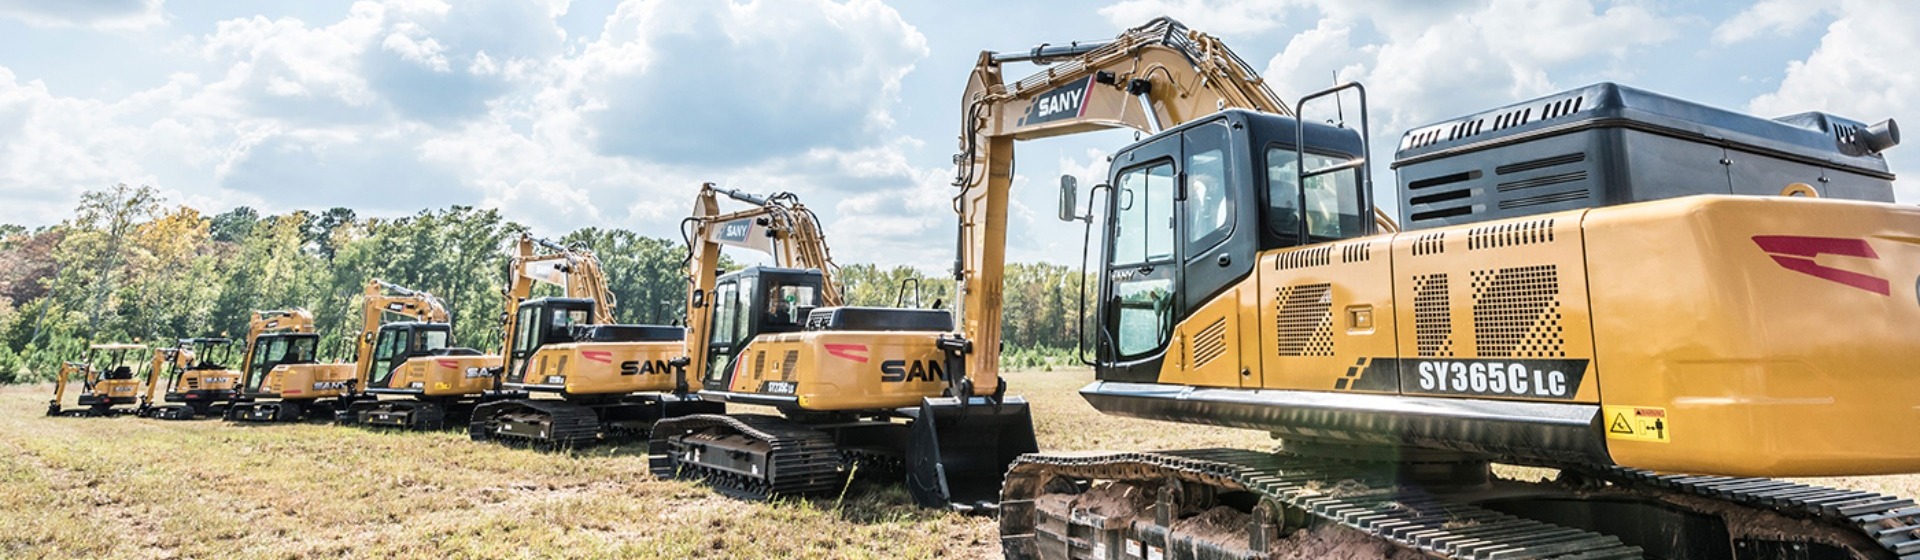 Sany Excavators: Built to deliver efficiency, safety and performance